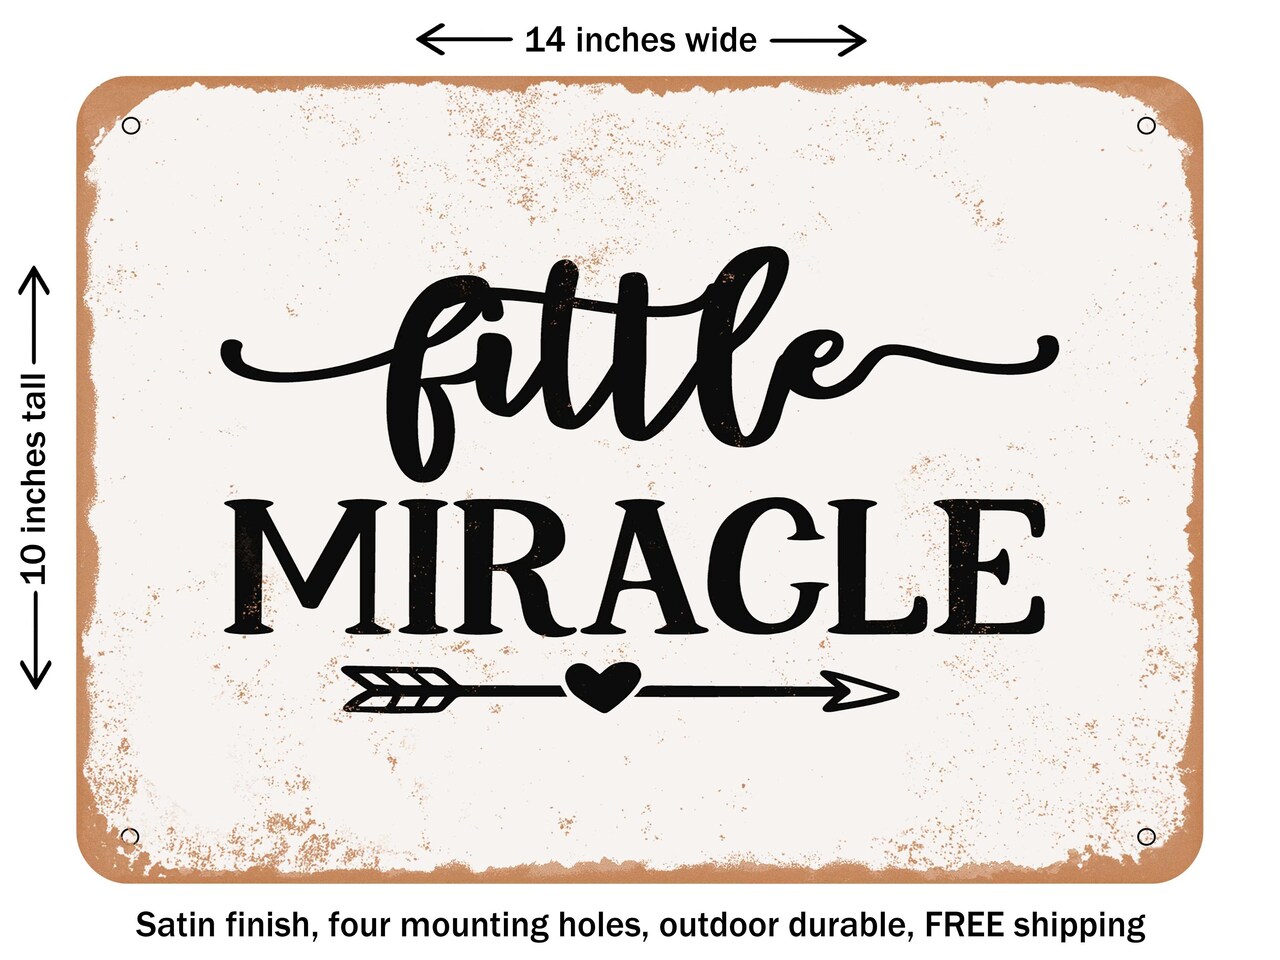 DECORATIVE METAL SIGN - Little Miracle - Vintage Rusty Look